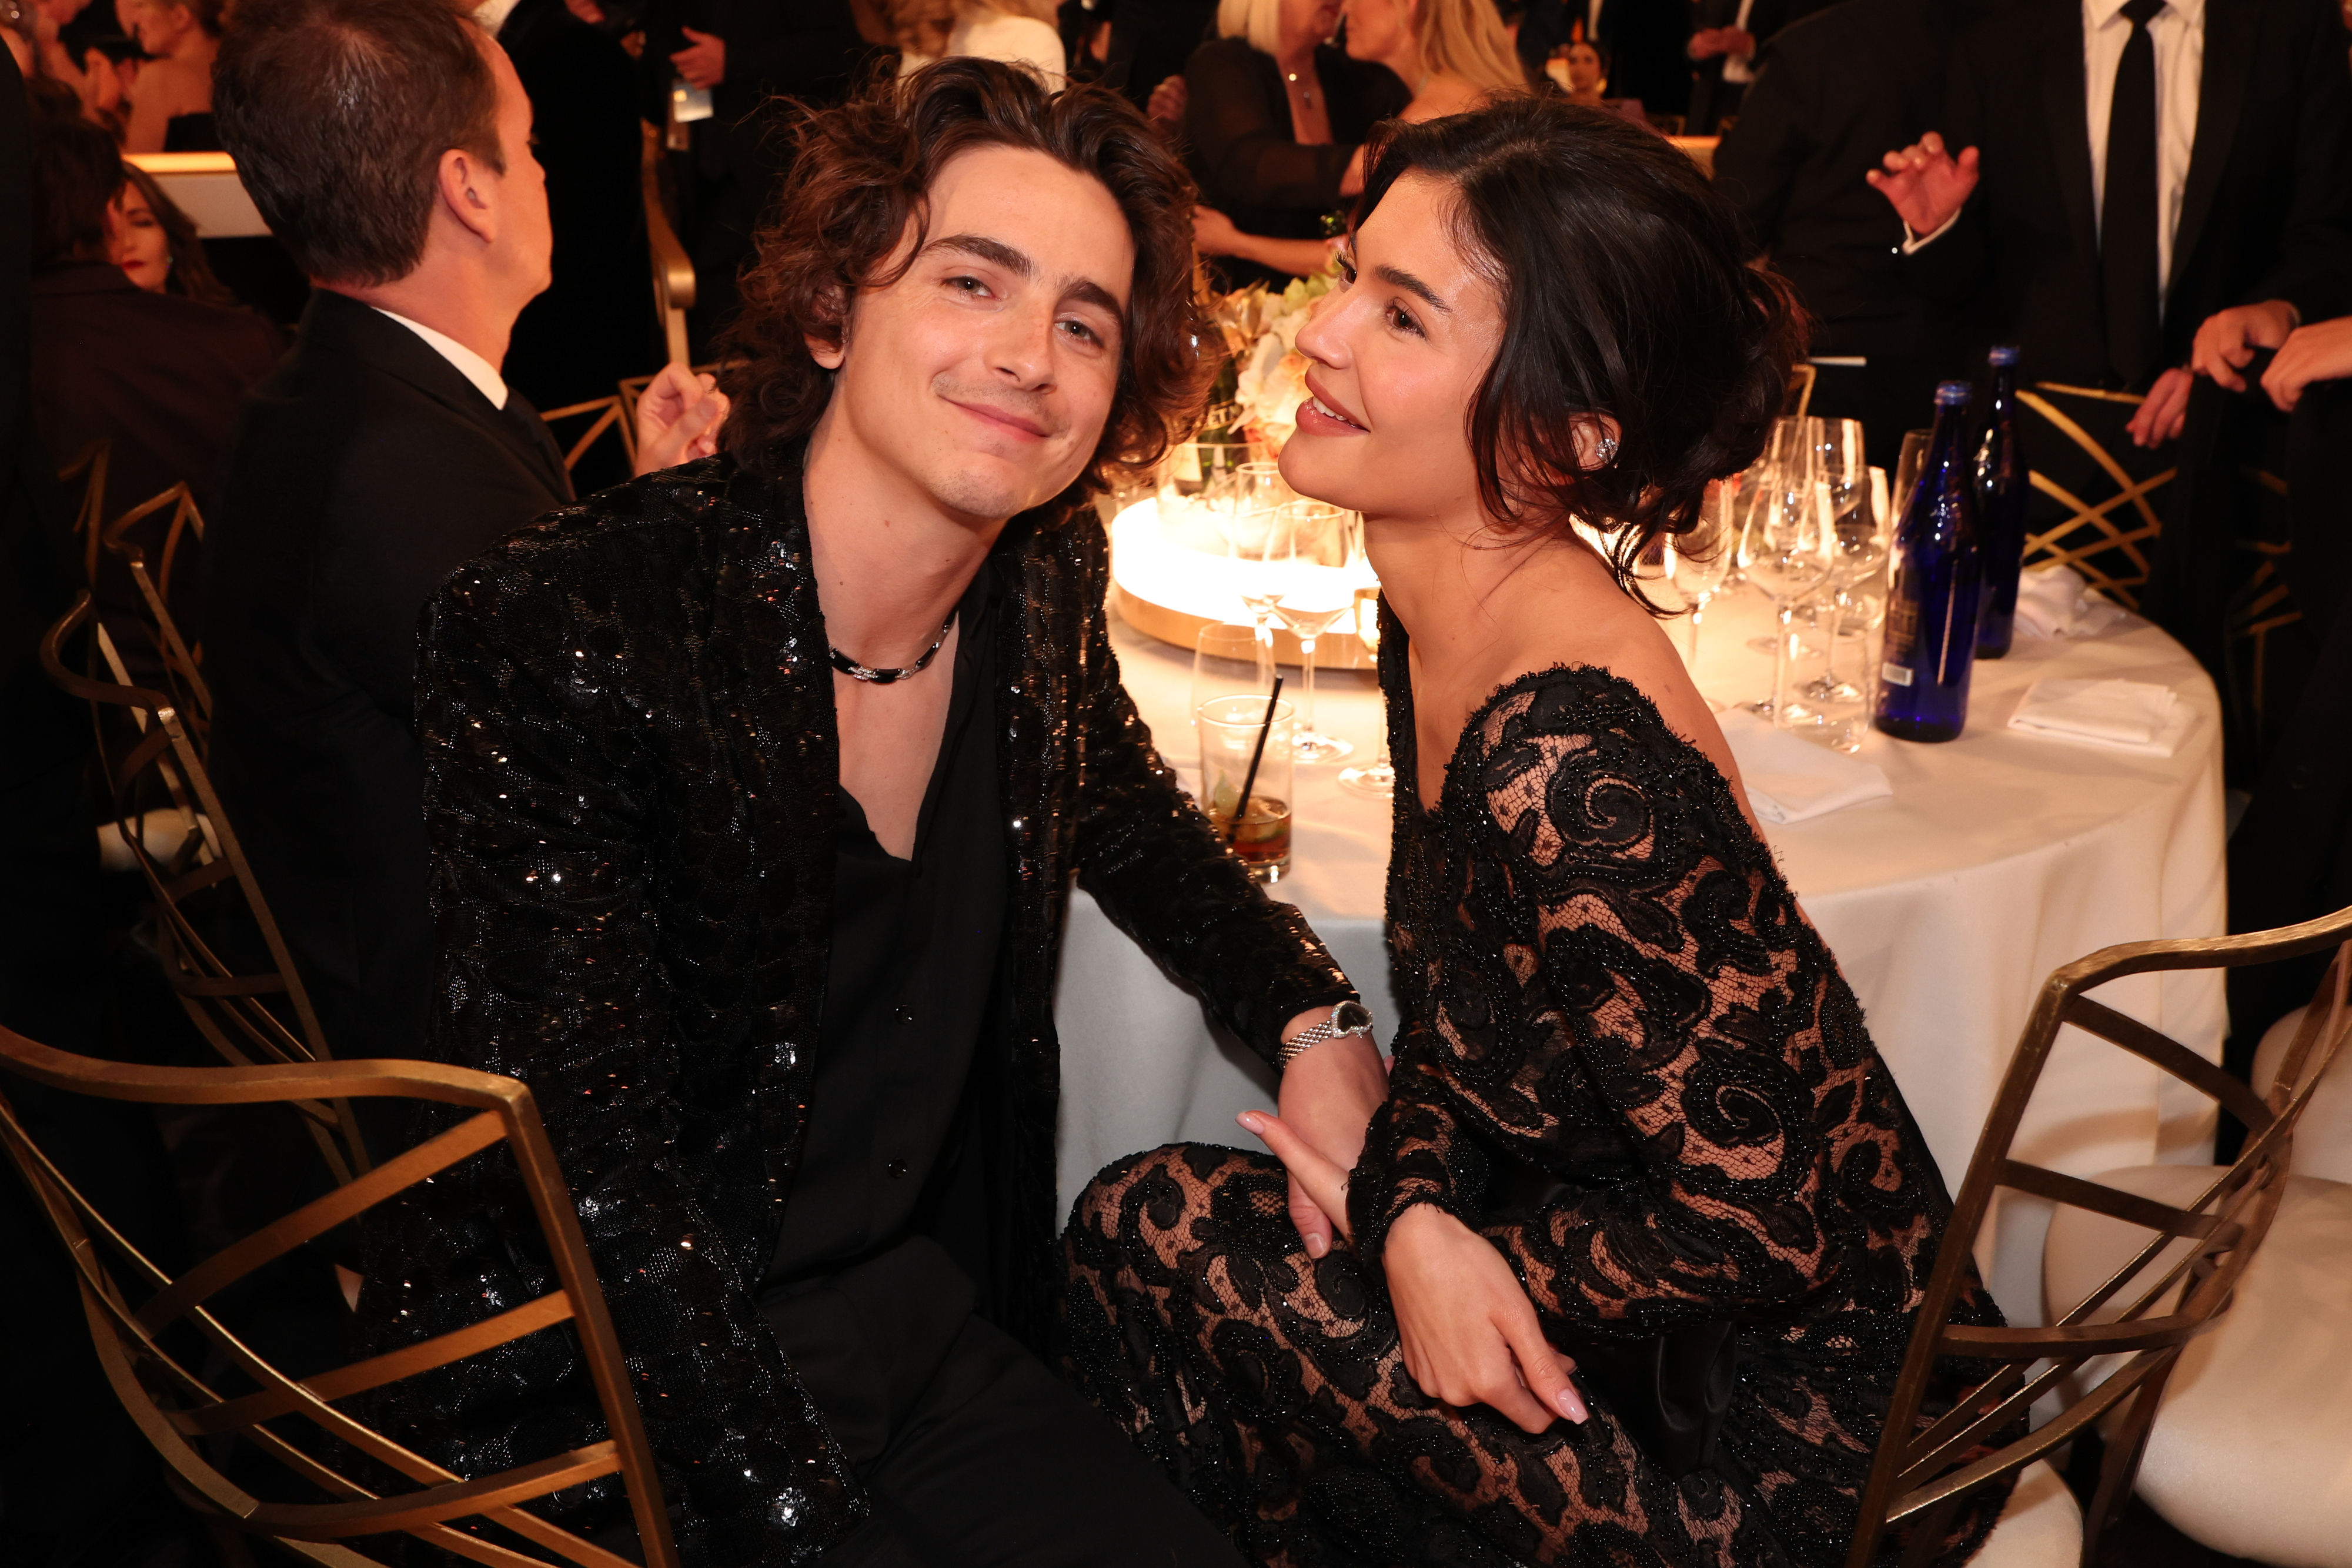 Timothée Chalamet and Kylie seated together at an event